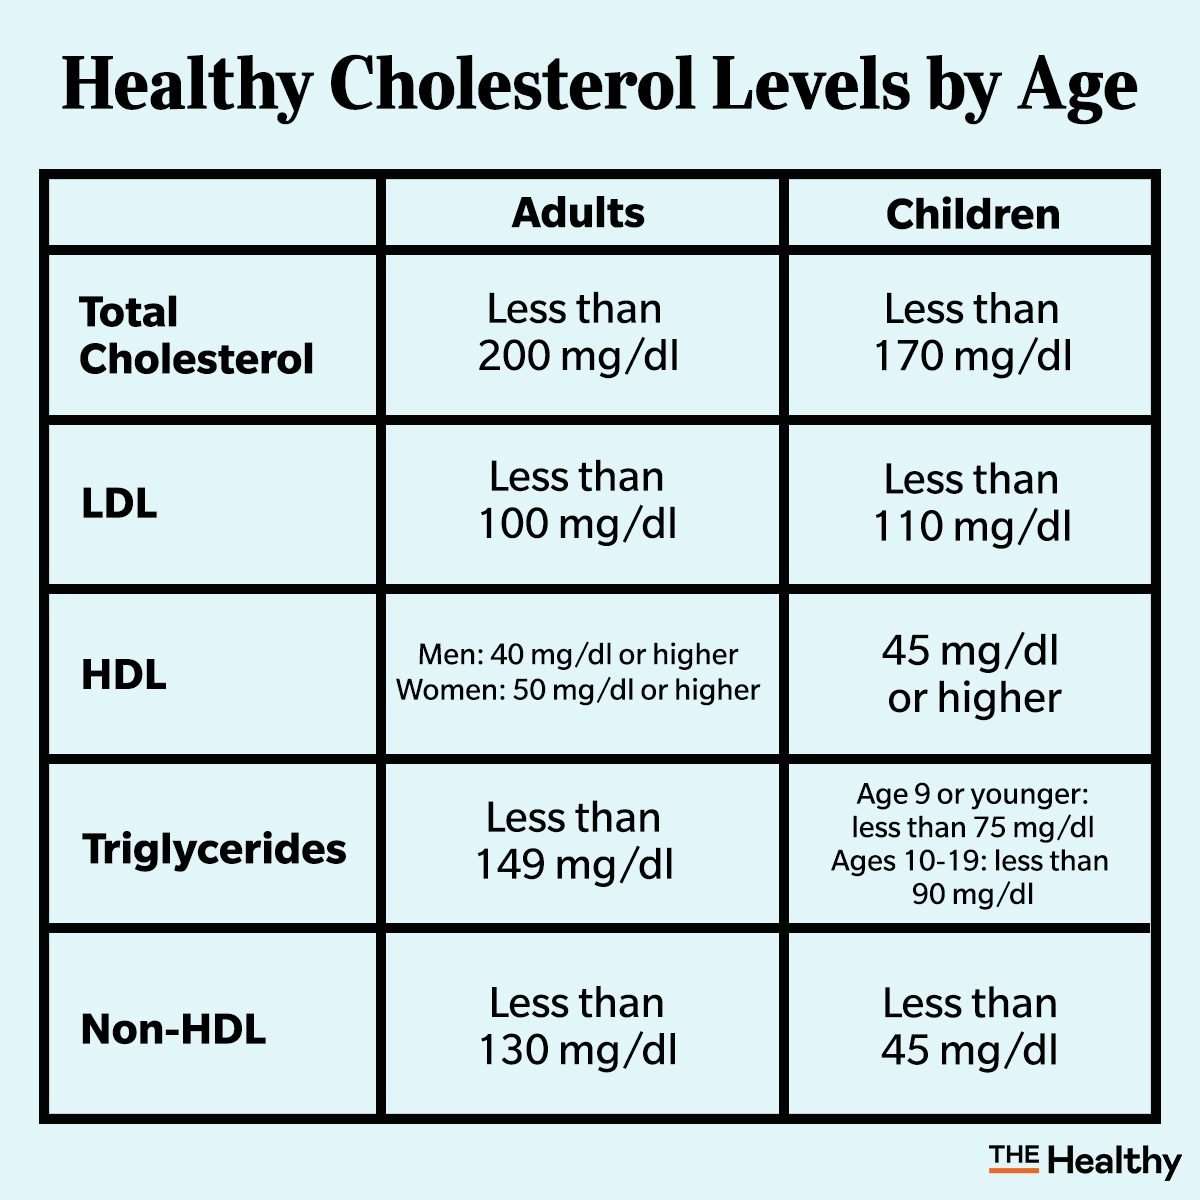 This Chart Shows Healthy Cholesterol Levels by Age